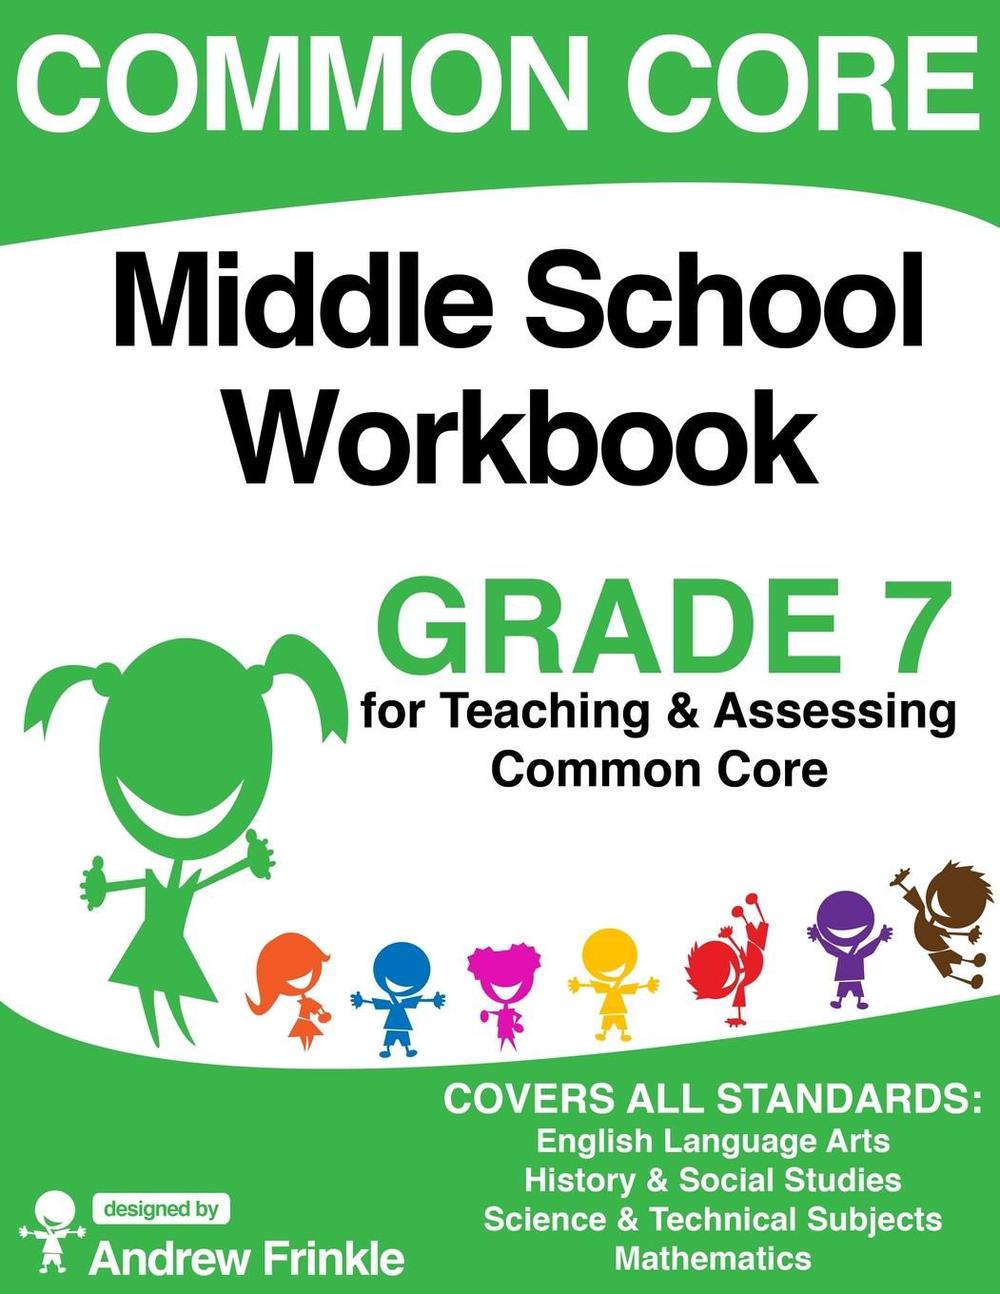 common-core-middle-school-workbook-grade-7-by-andrew-frinkle-english-paperback-9781511544276